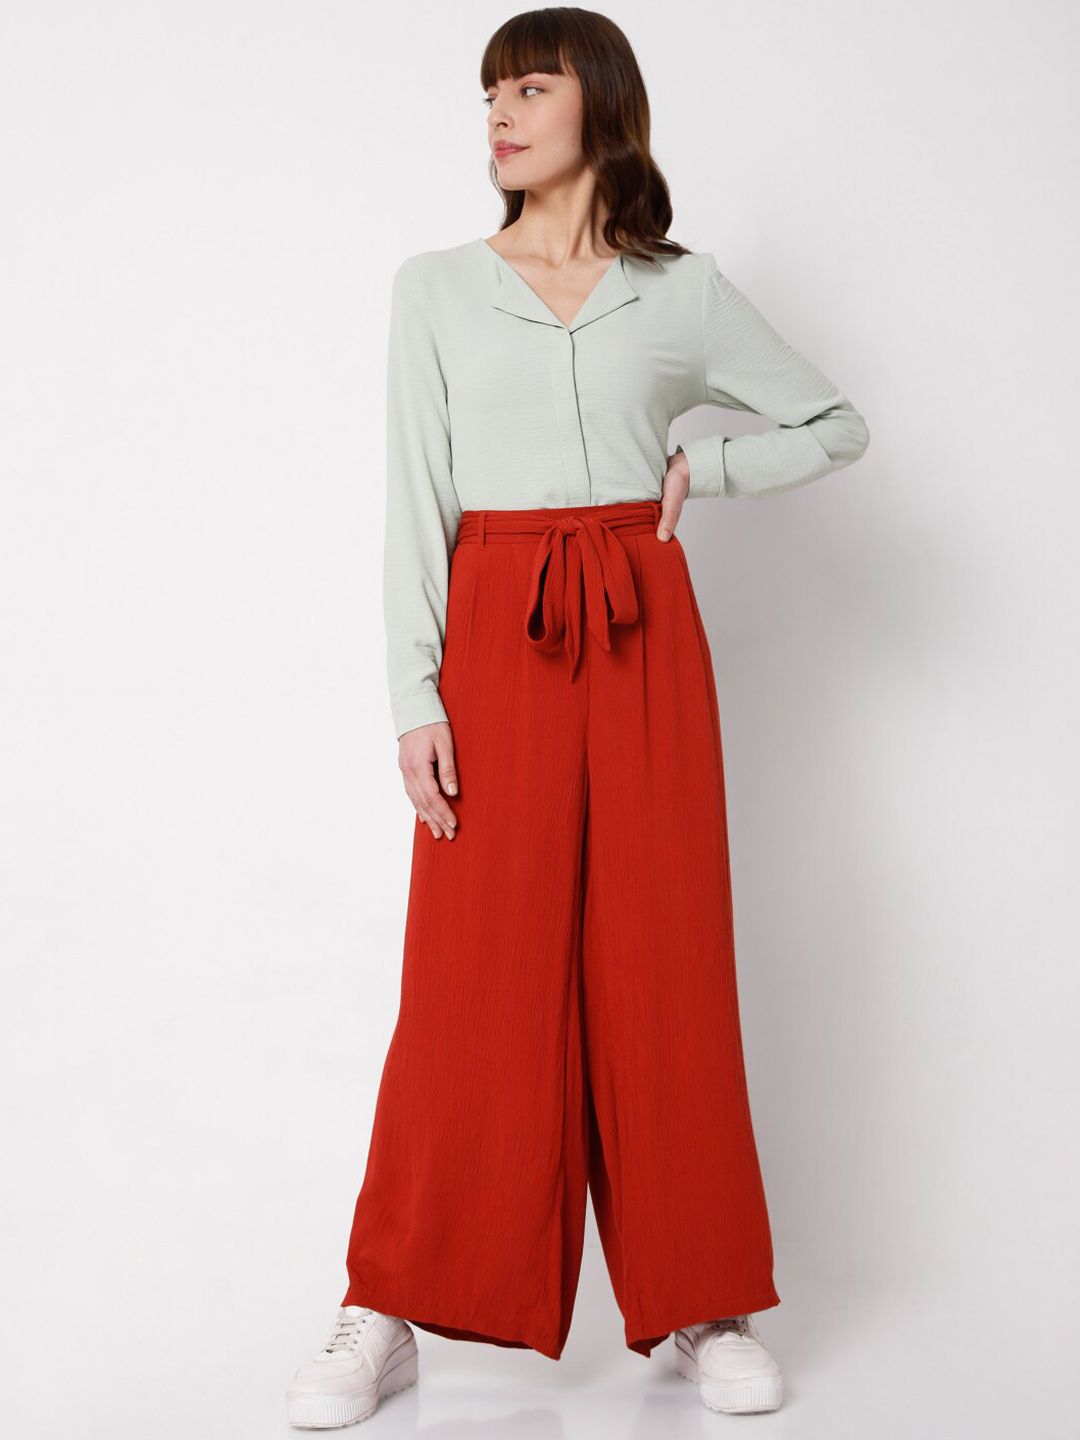 Vero Moda Women Red Flared High-Rise Trousers Price in India